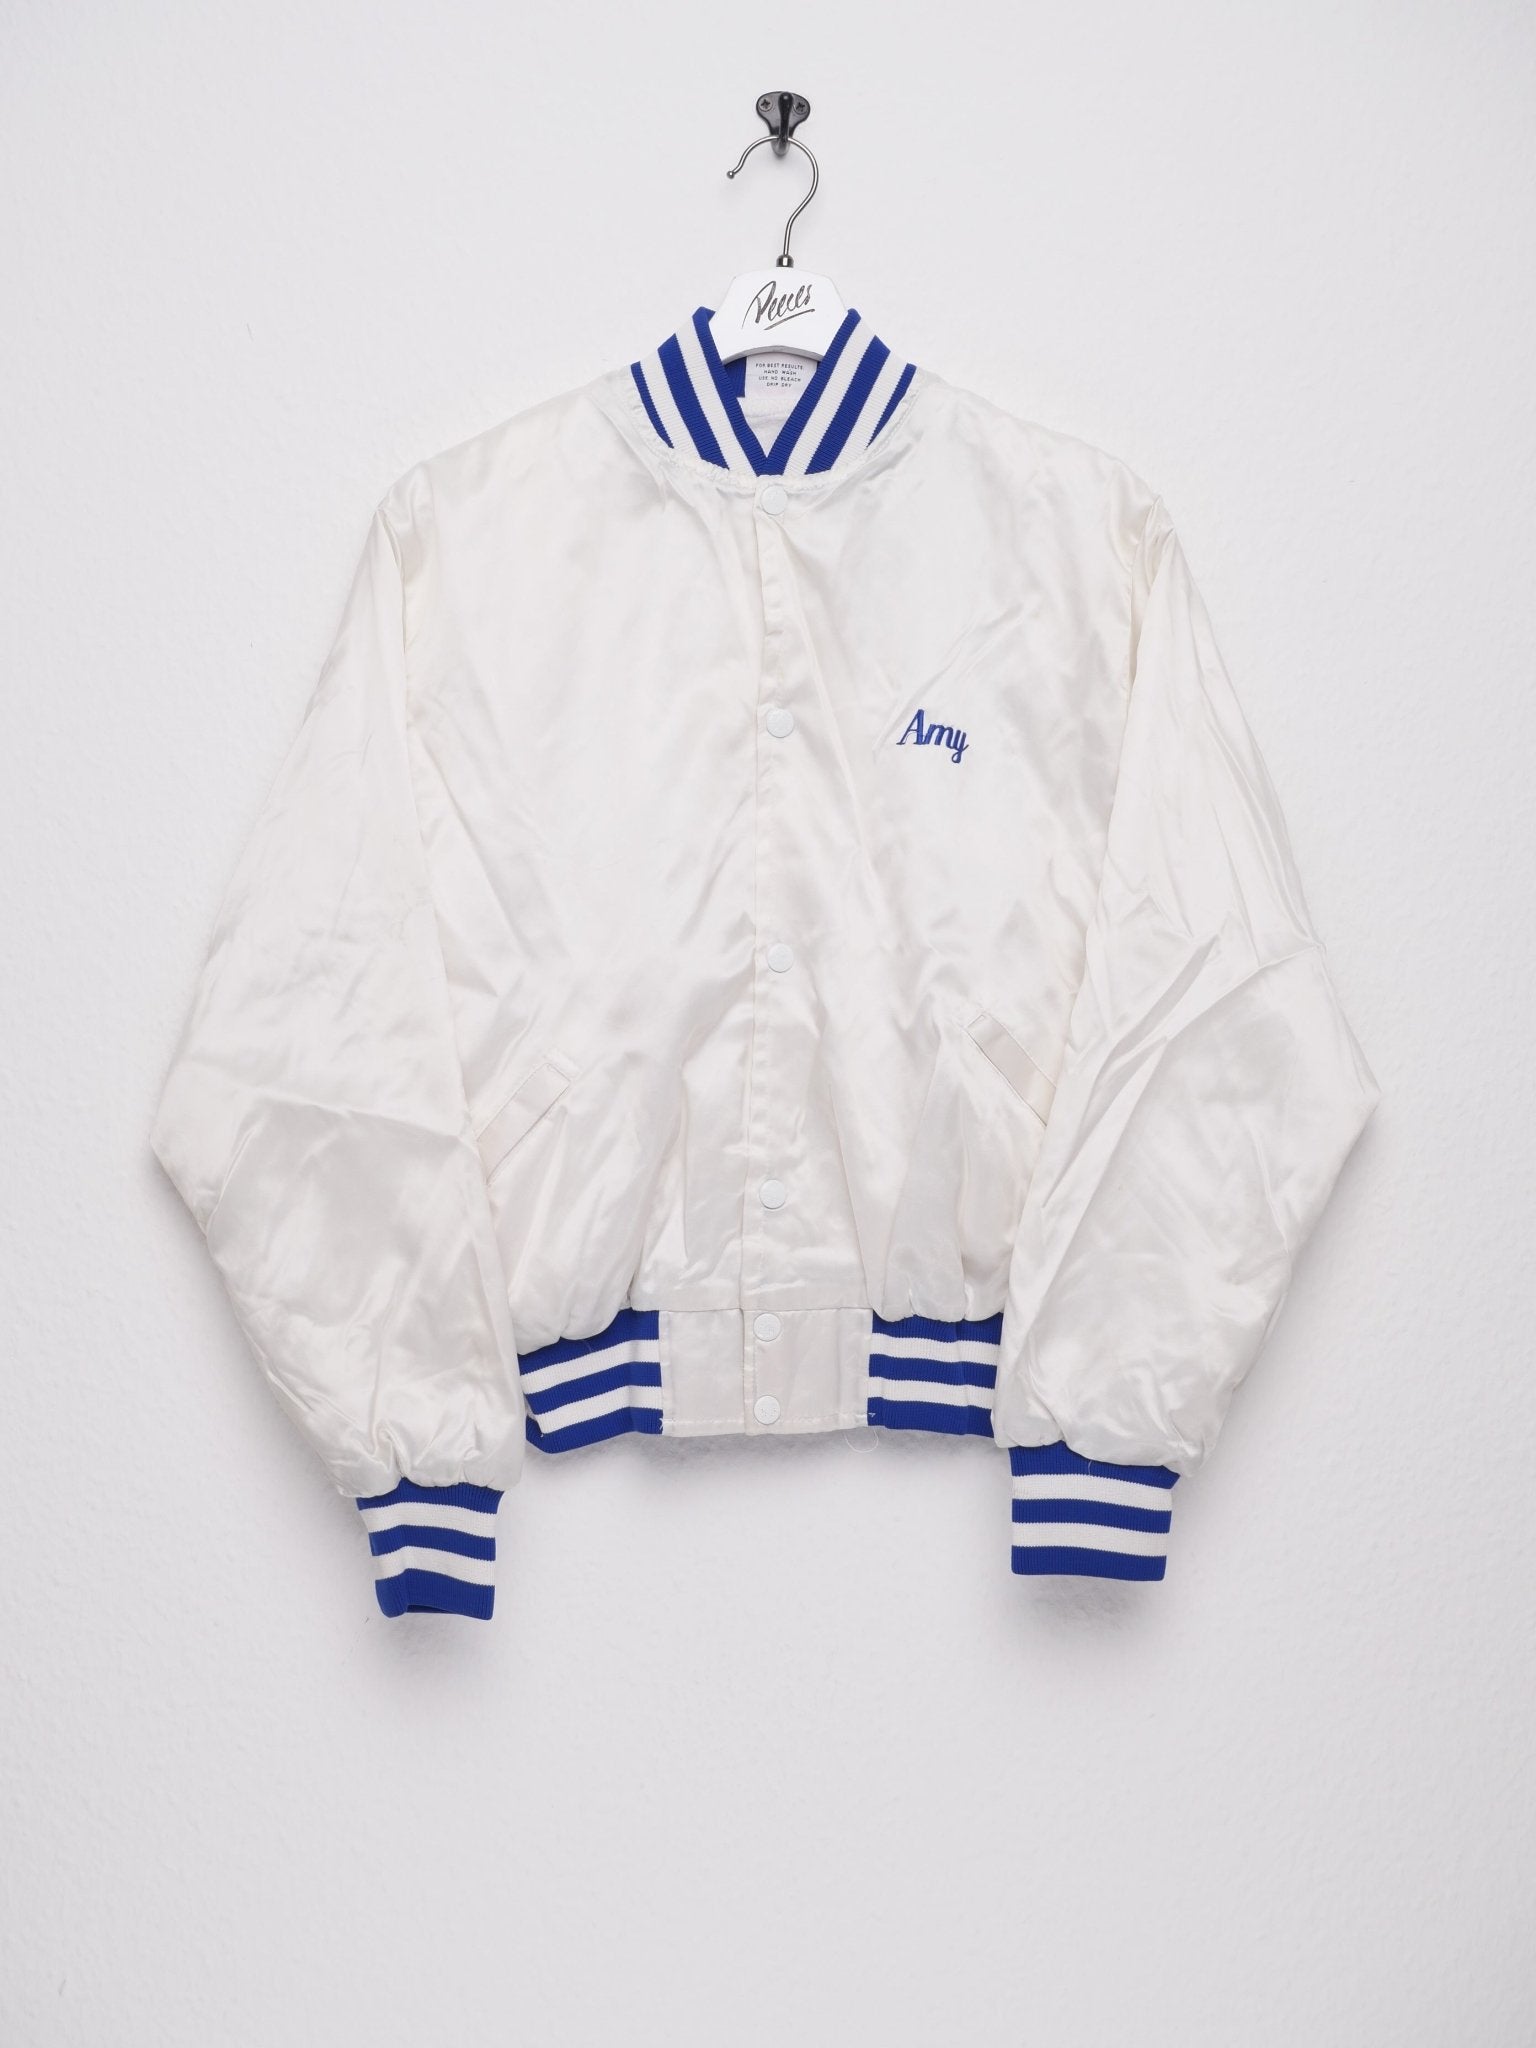 Amy embroidered Spellout white College Jacke - Peeces